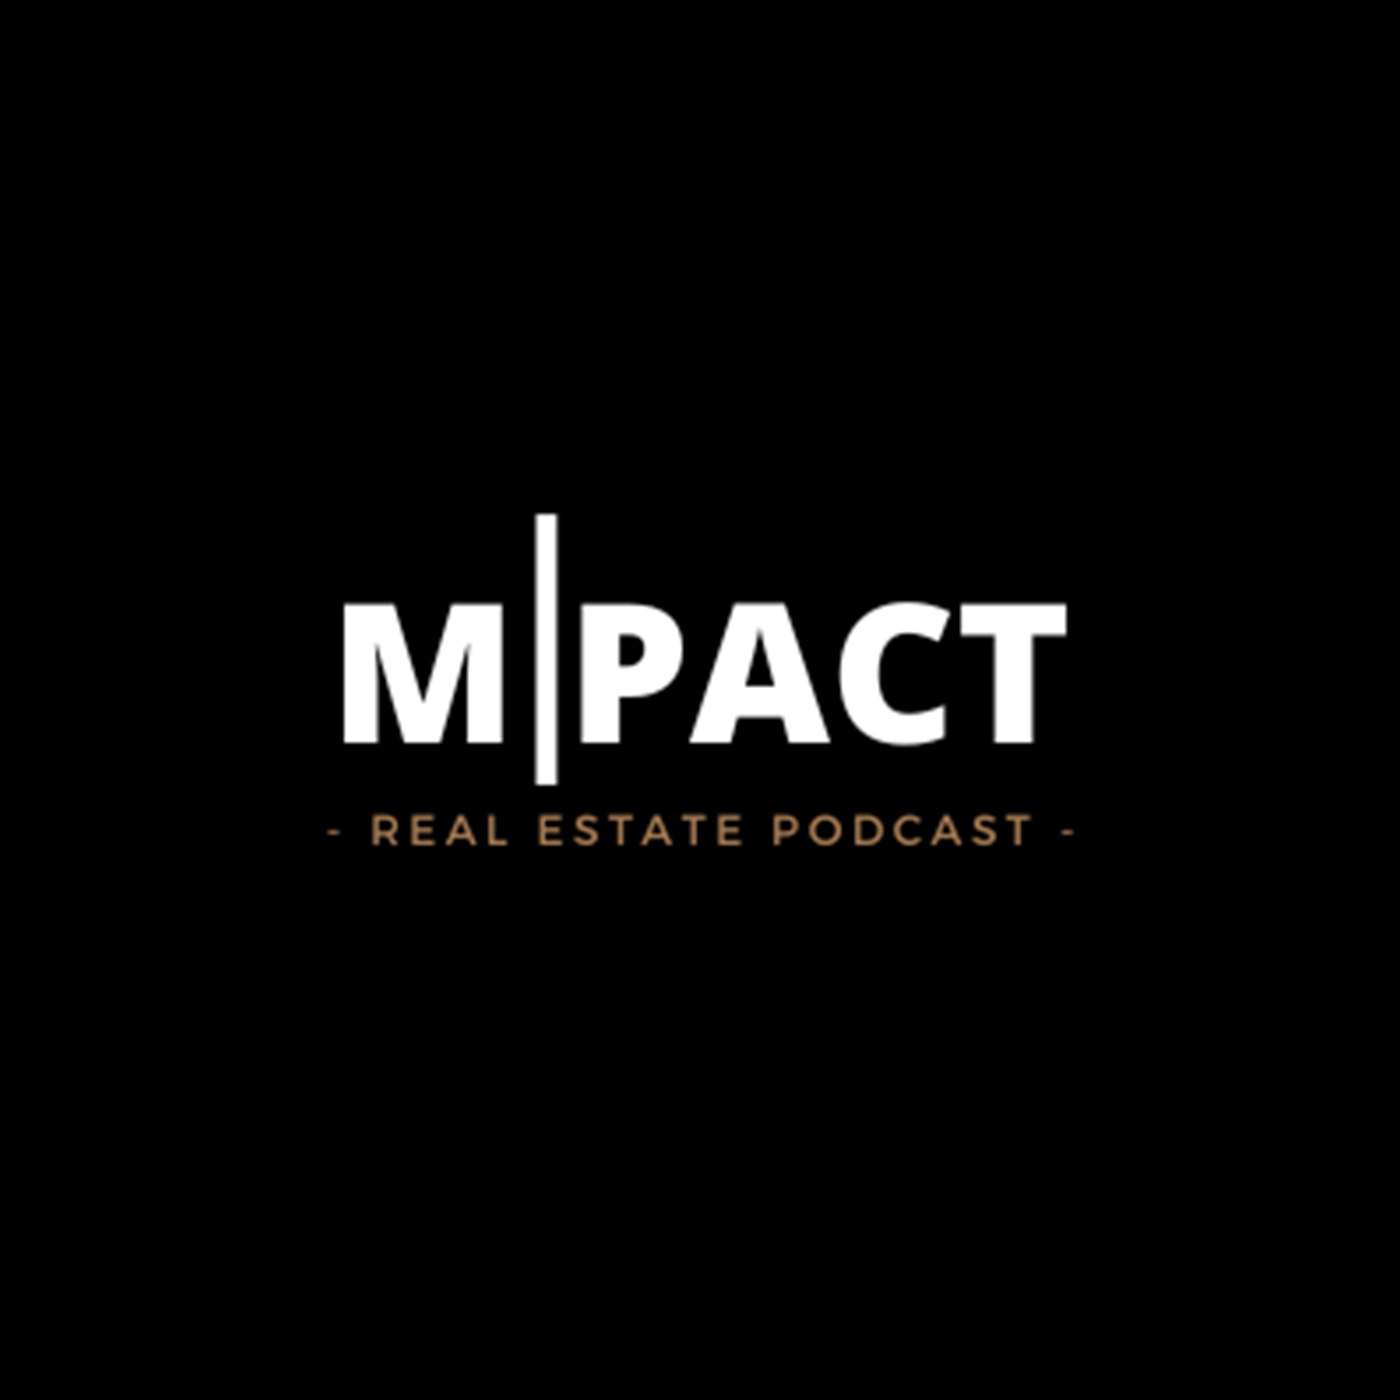 Artwork for MPACT Real Estate